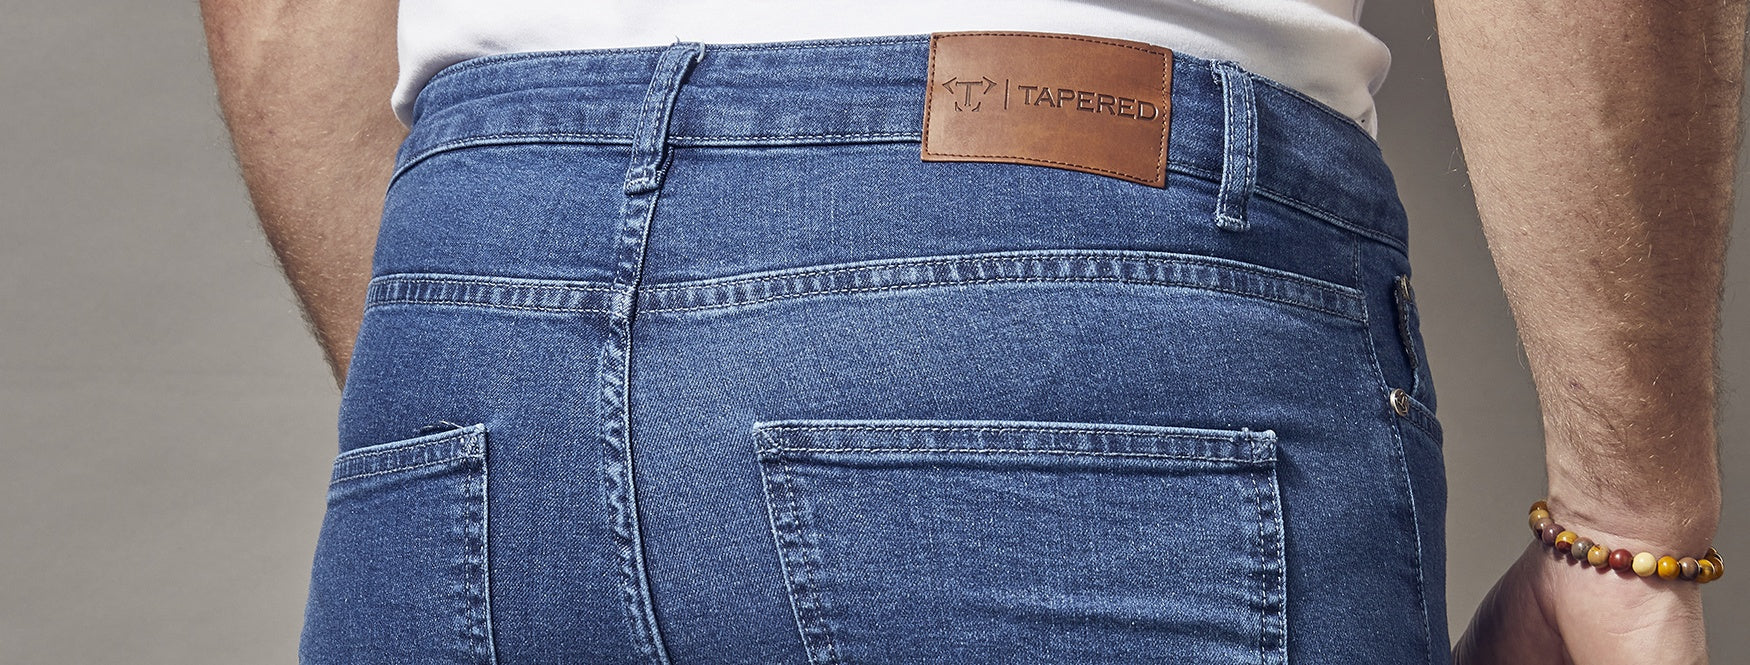 Here's how to take in your jeans waist in minutes without sewing